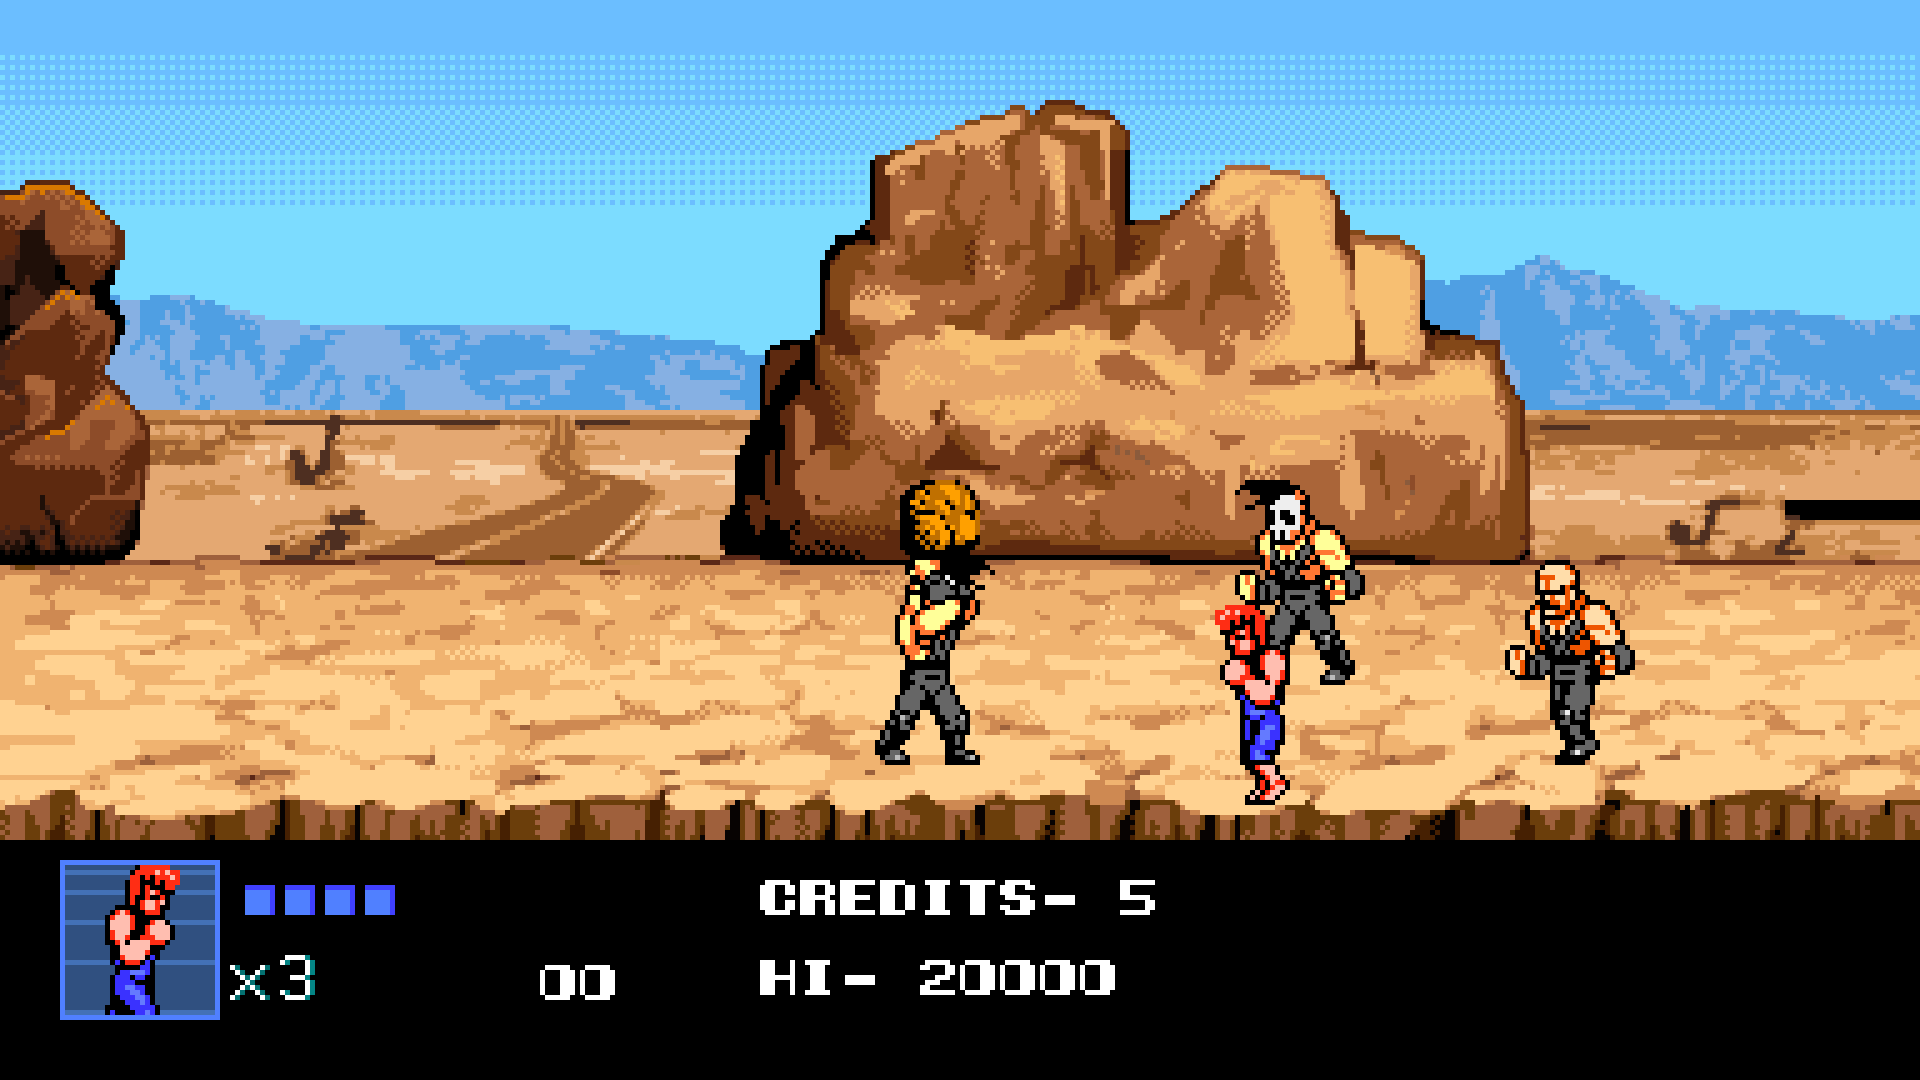 DOUBLE DRAGON IV (Playstation 4)- Review – Seafoam Gaming